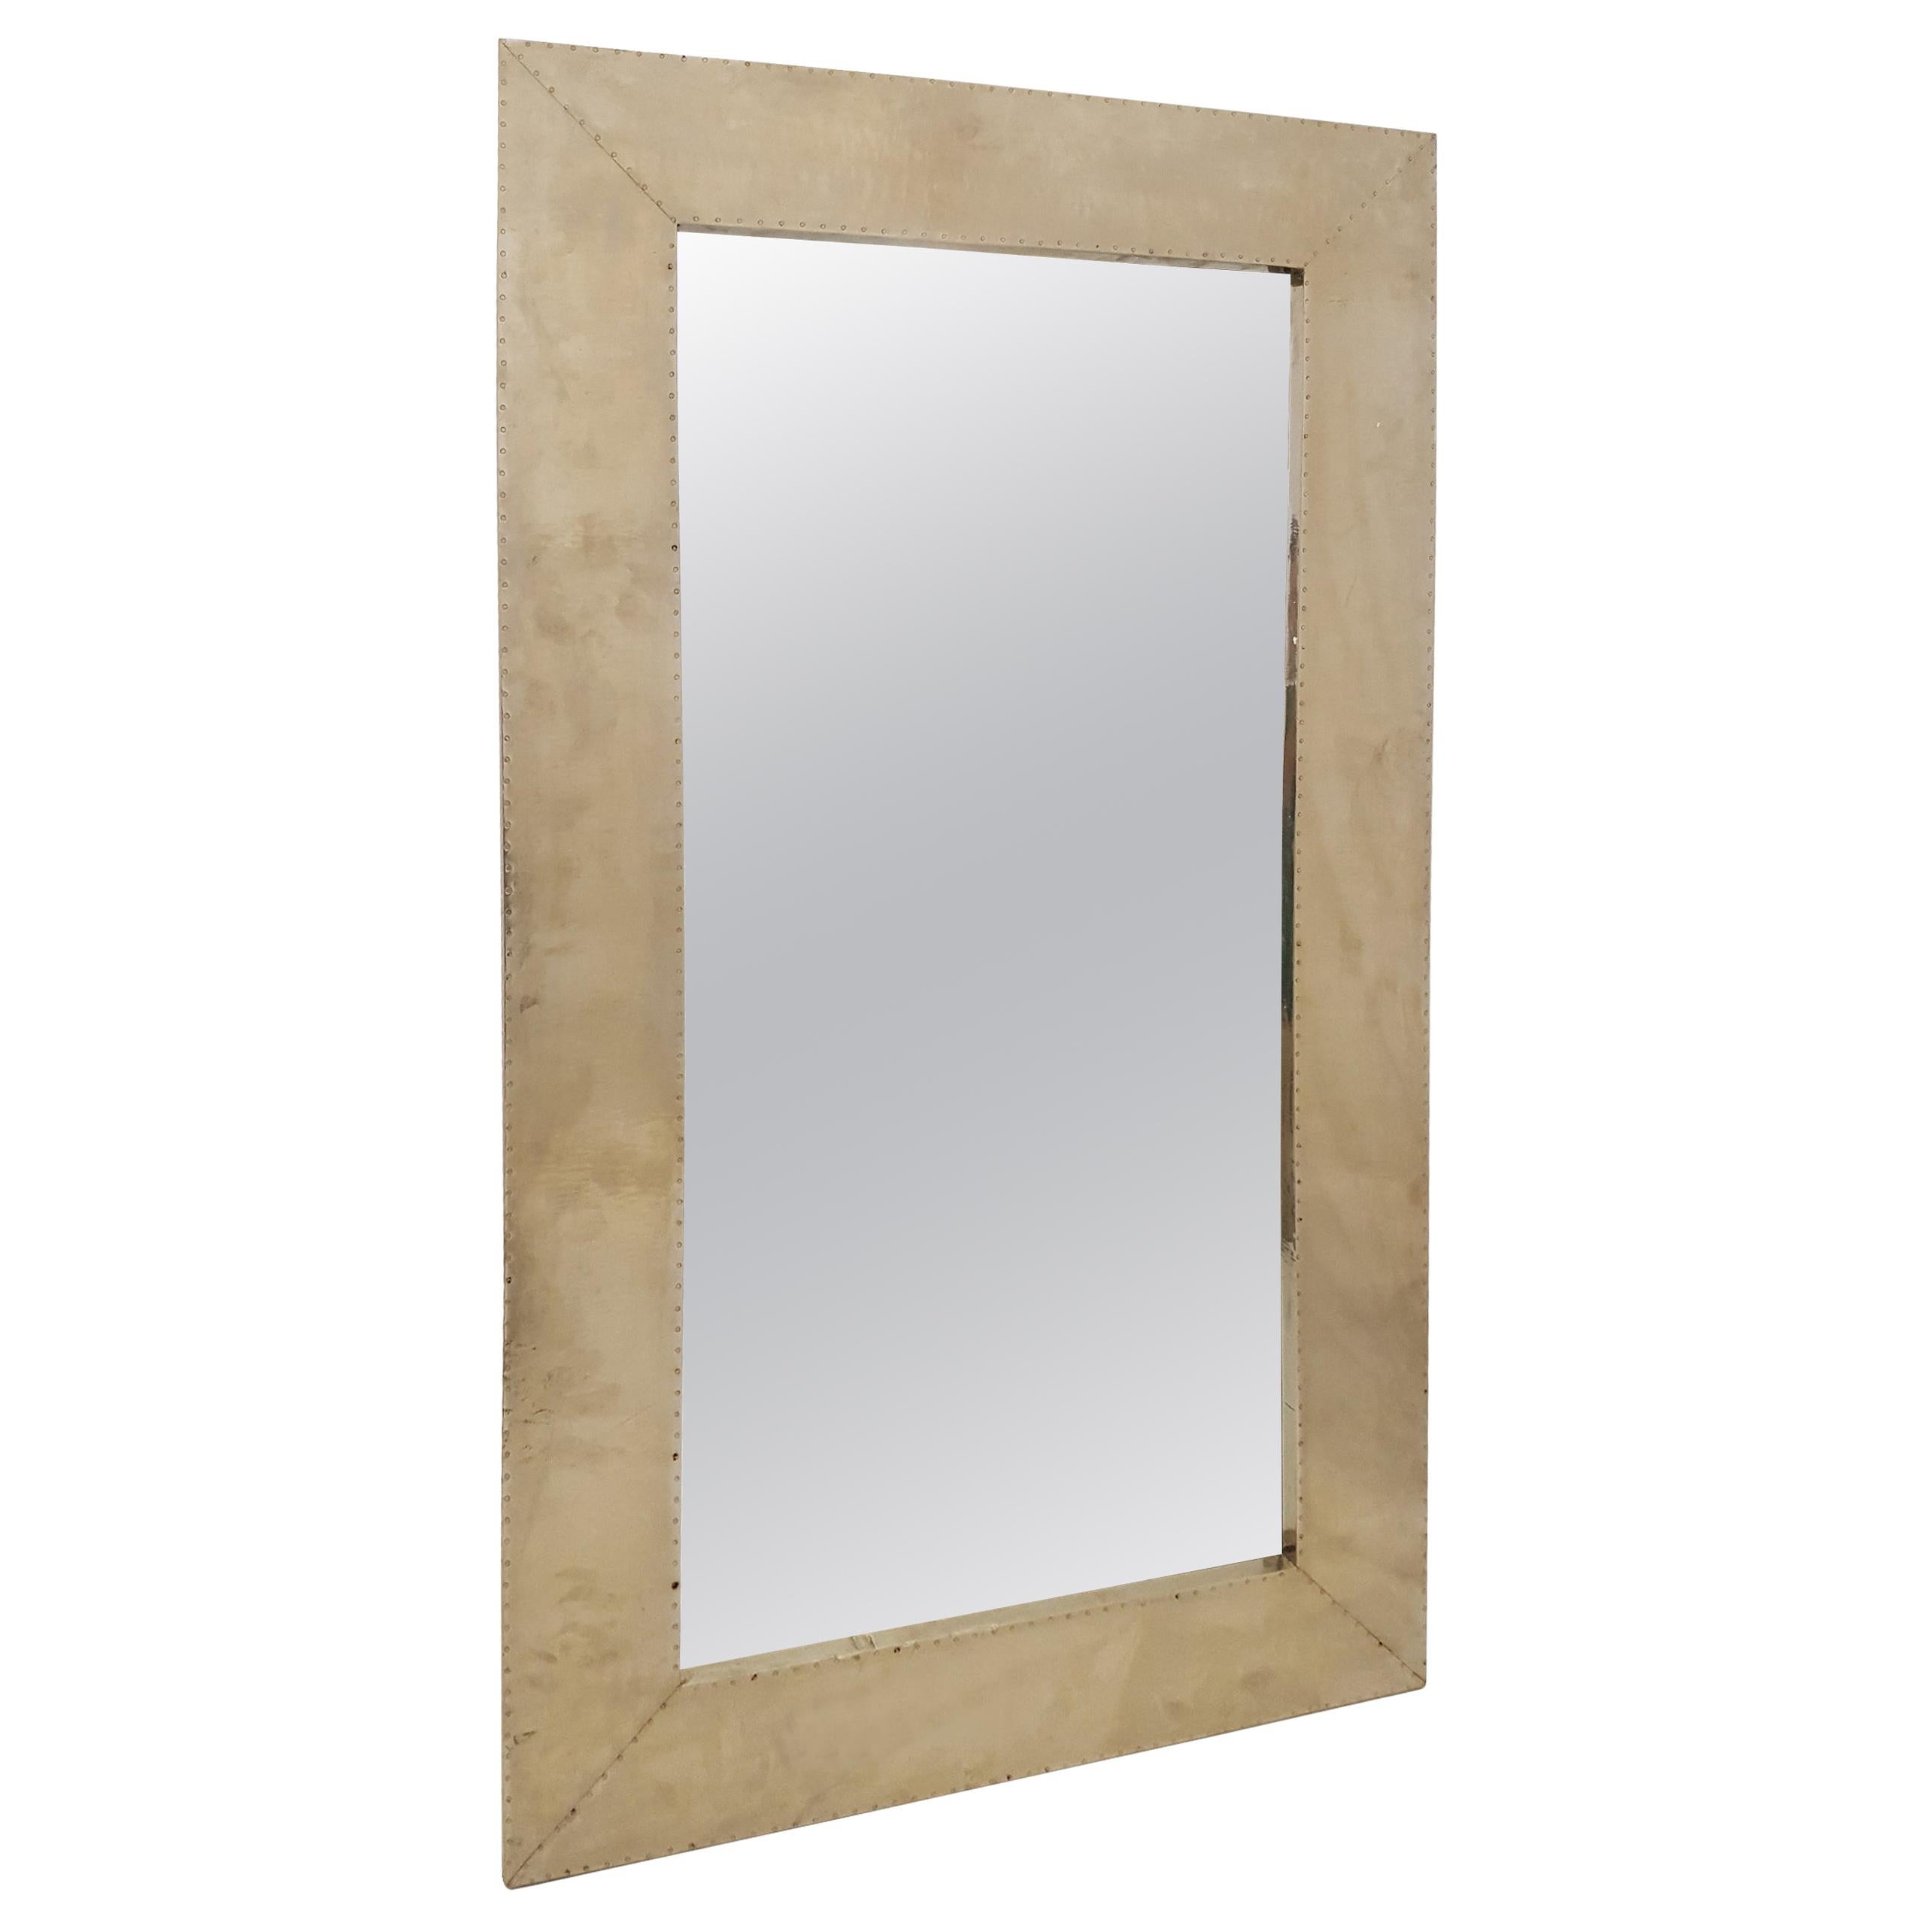 Plain Mirror Frame Metal Clad Over MDF by Stephanie Odegard For Sale